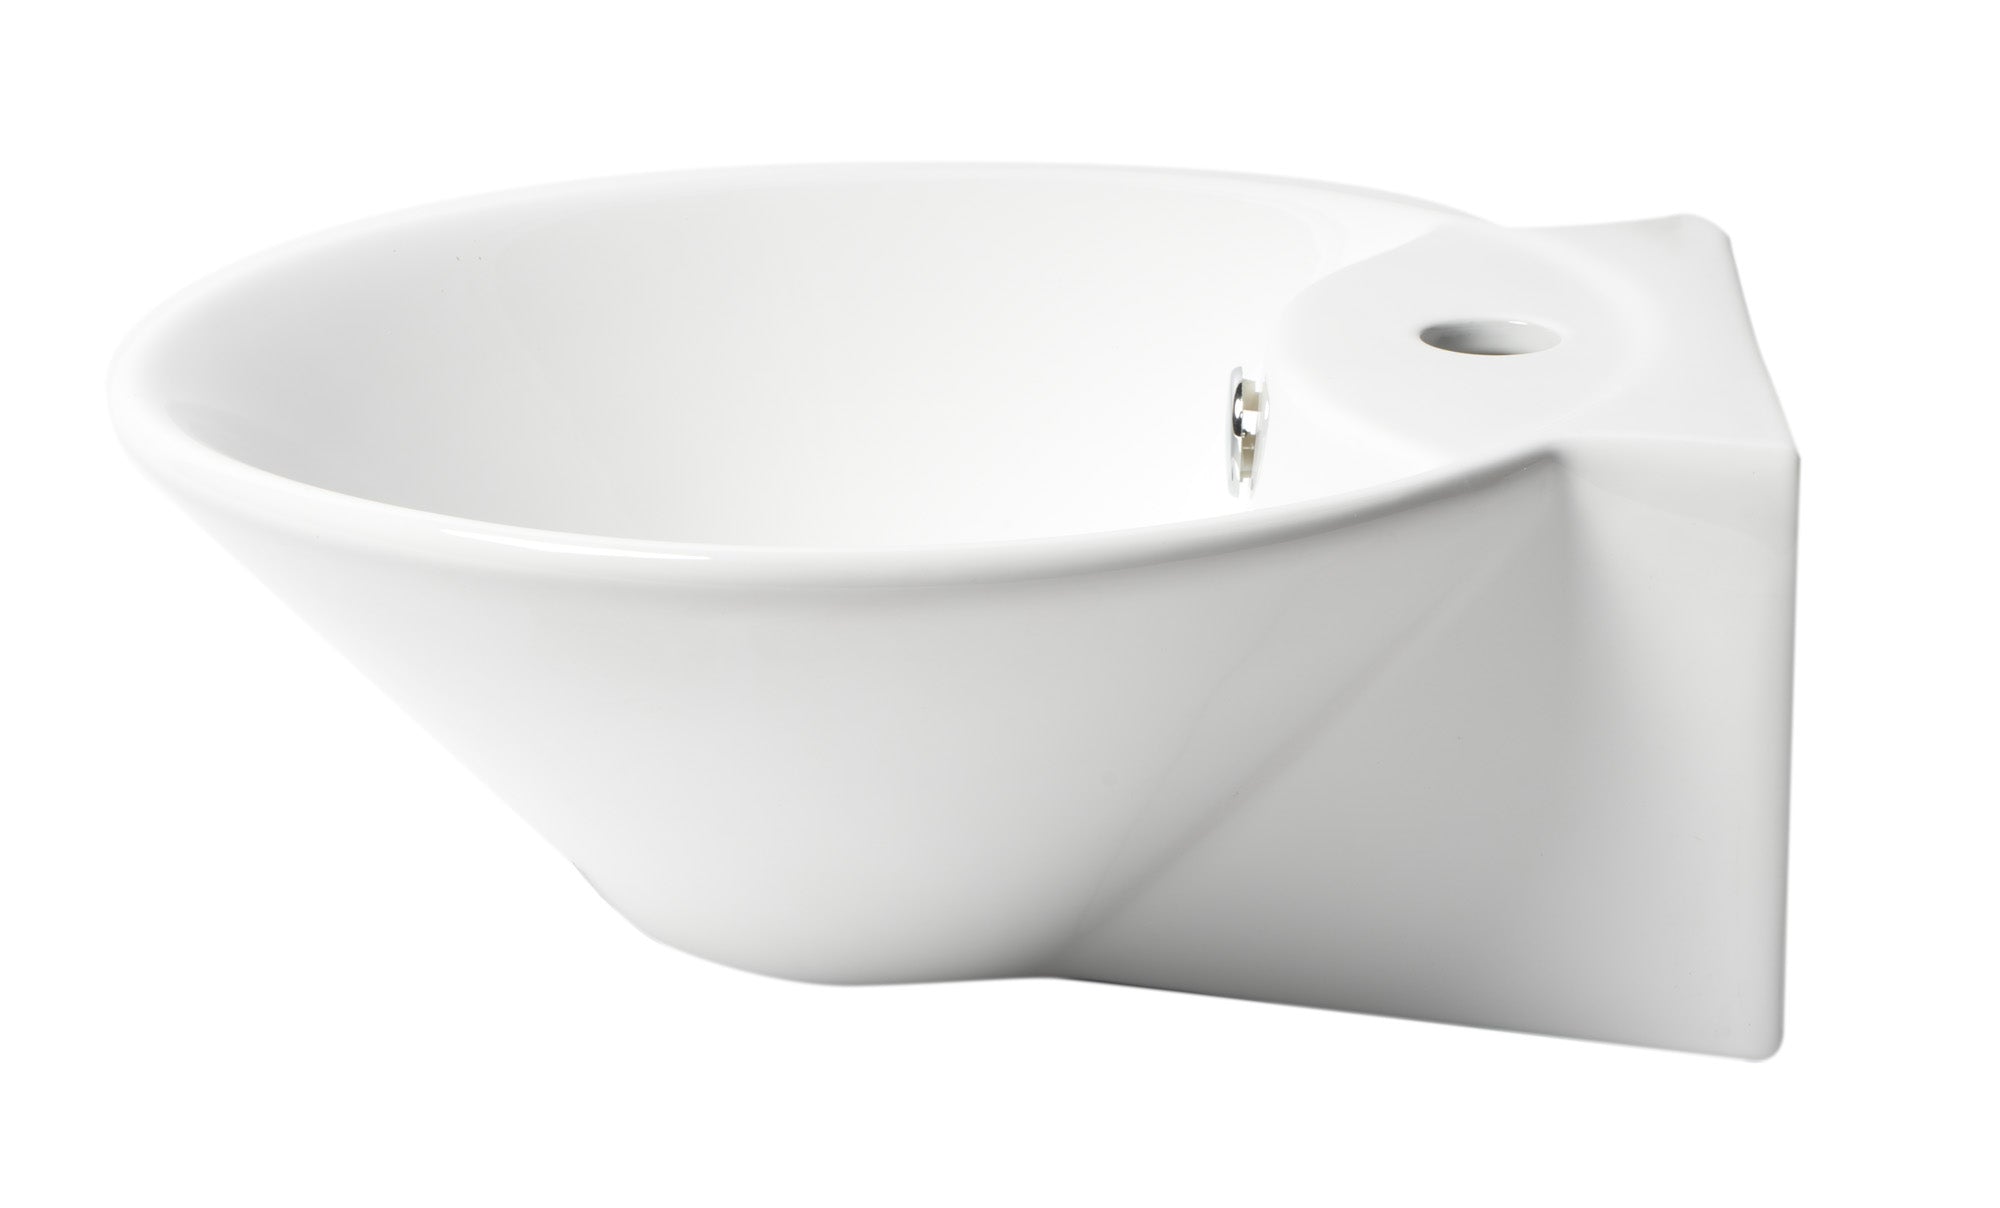 ALFI ABC113 Sink w/ Faucet Hole White Round Wall Mounted Ceramic (17-inch)